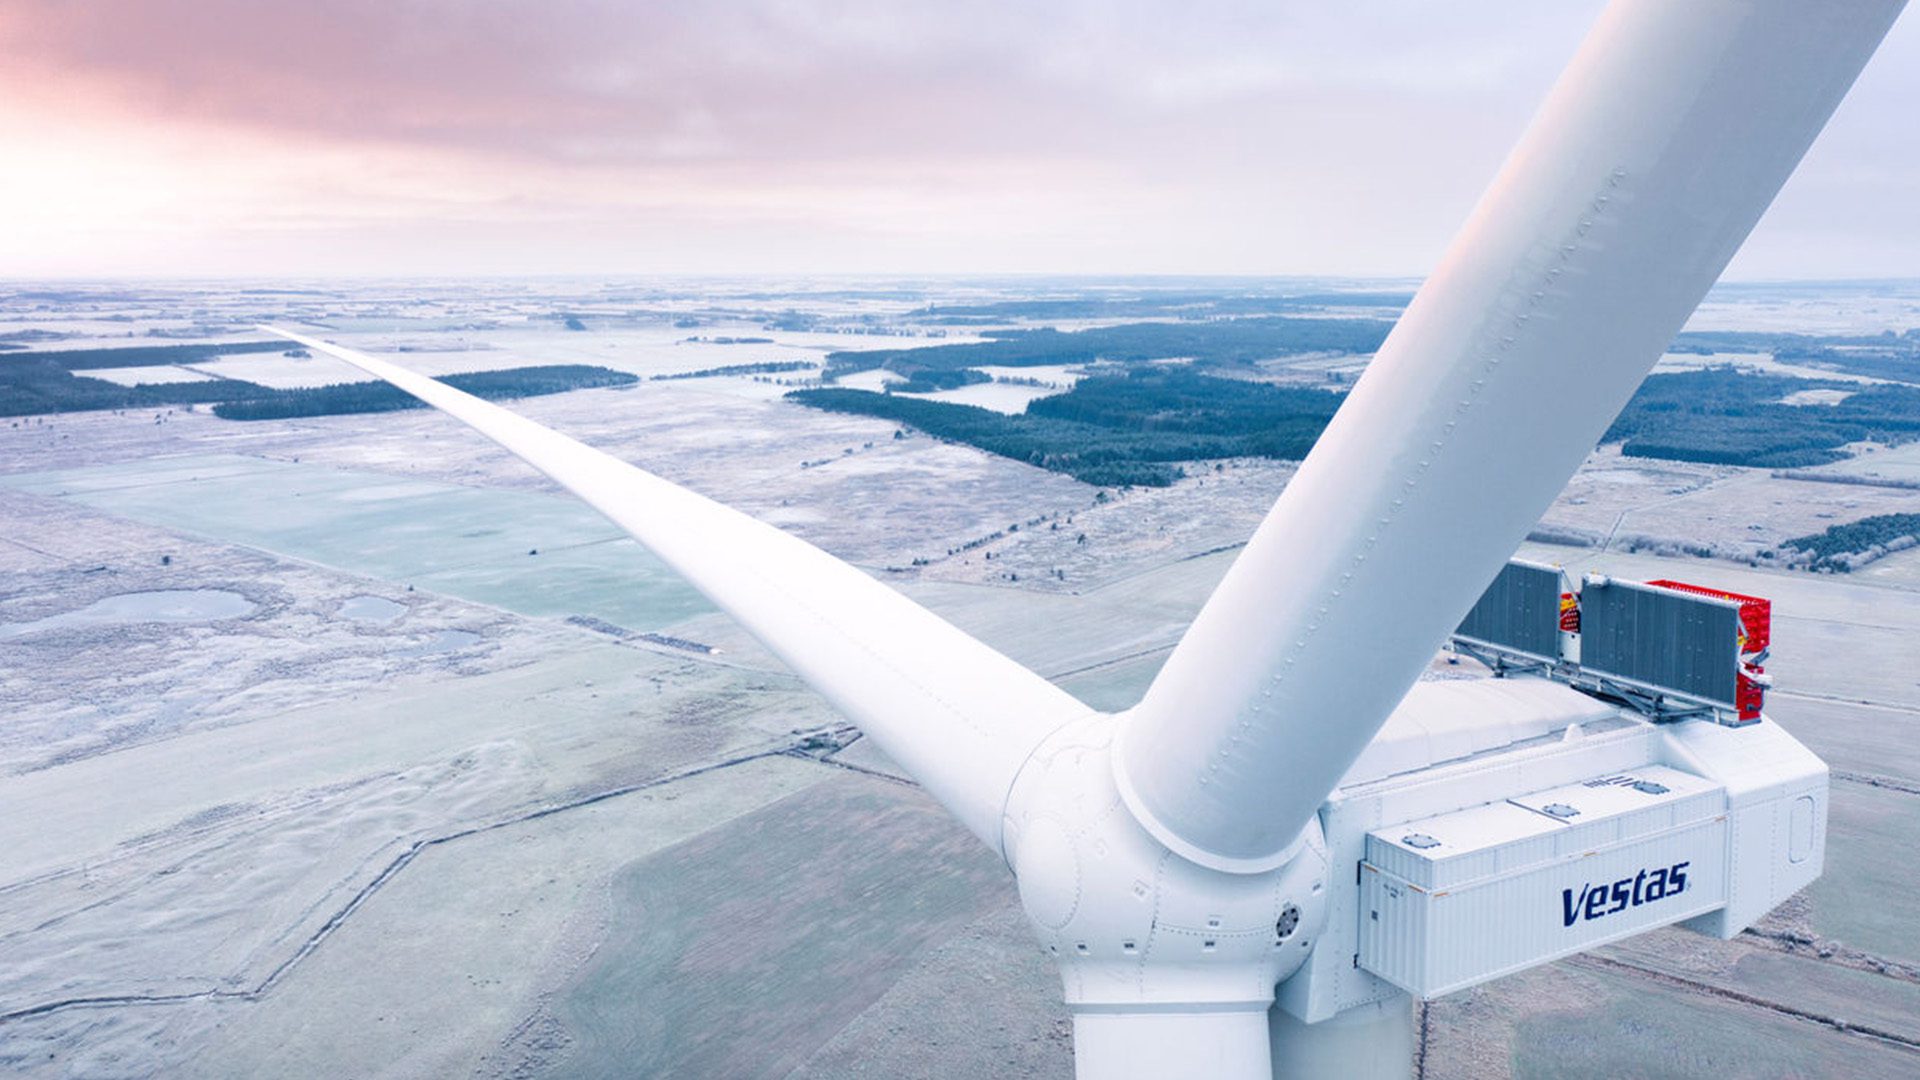 Vestas’ V236-15.0MW prototype wind turbine, the world's most powerful wind turbine, successfully produced its first kWh of power